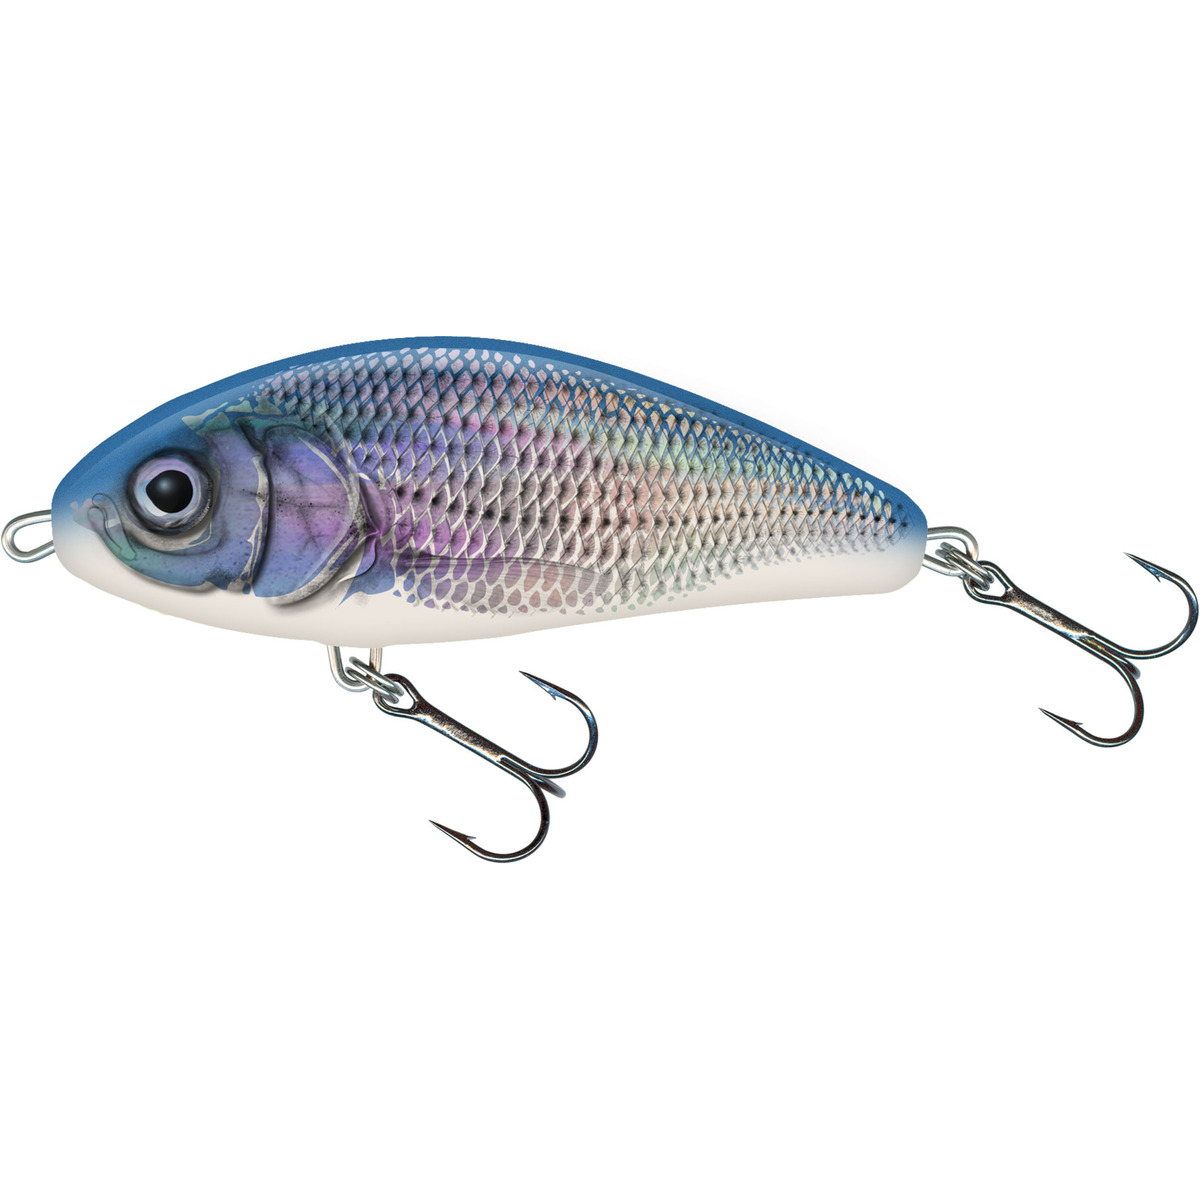 Salmo Fatso 14 Cm Sinking Limited Edition Colours - Blue Fingerling